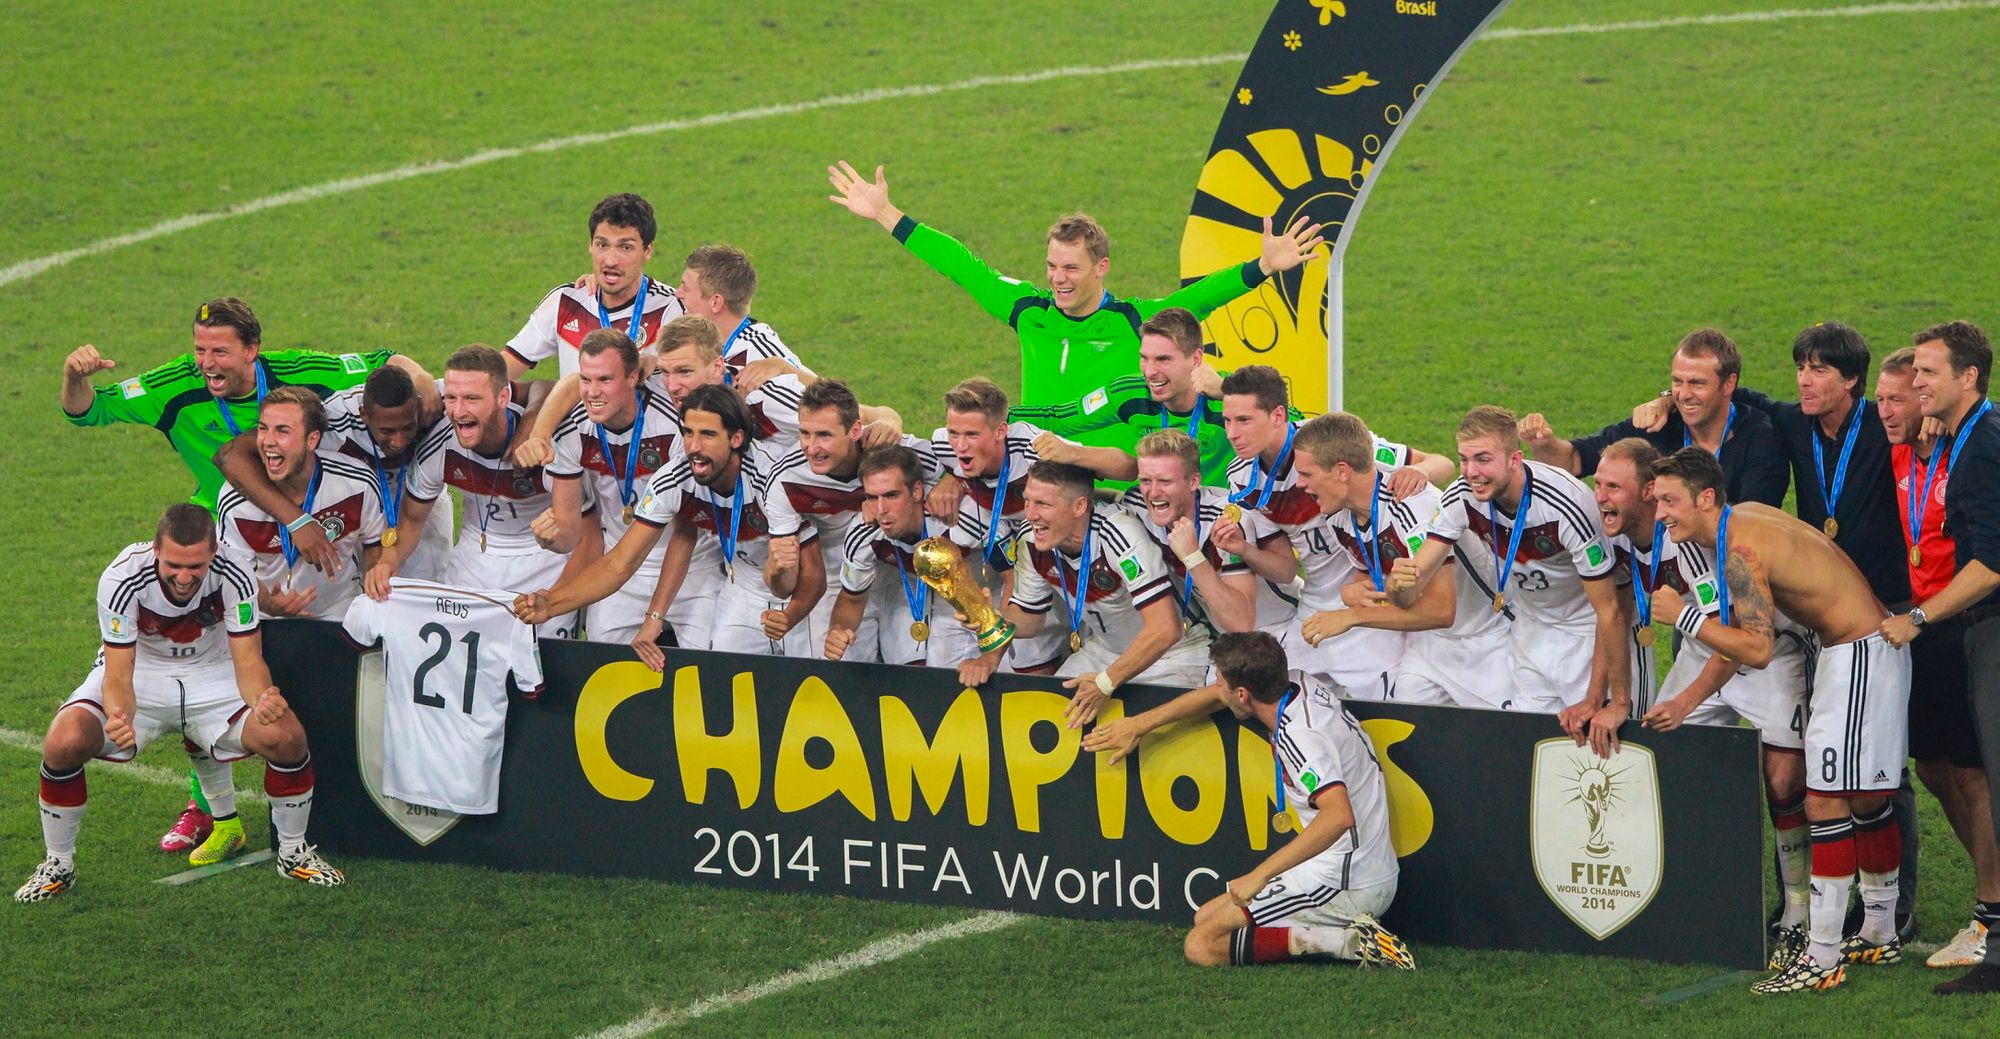 Predicting the FIFA 2014 Final Winner with Logistic Regression